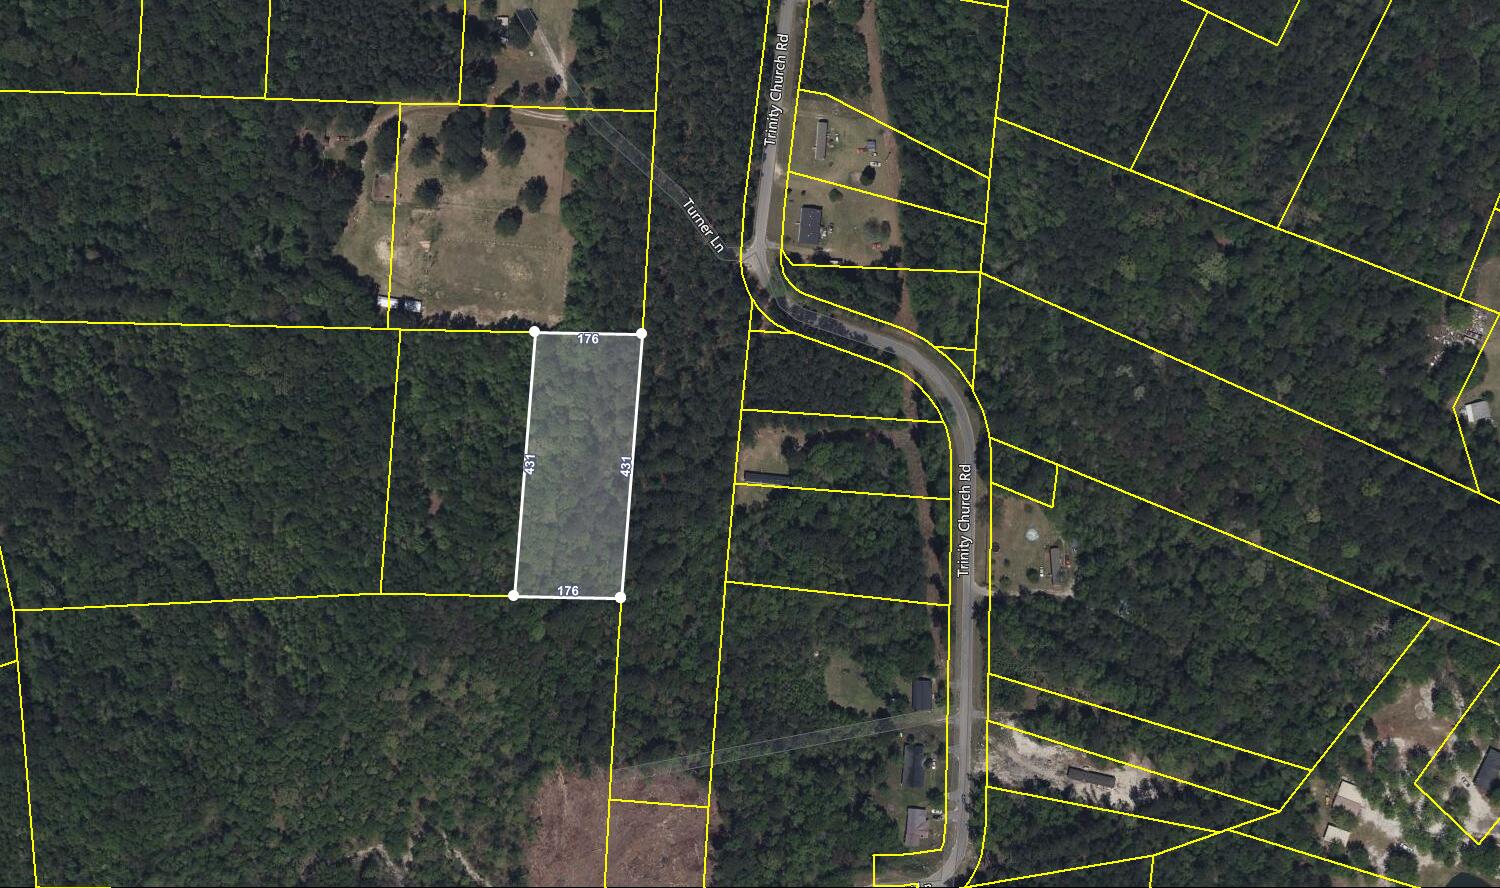 Aerial view - Tract 3 Chauncey Lane 2 ac